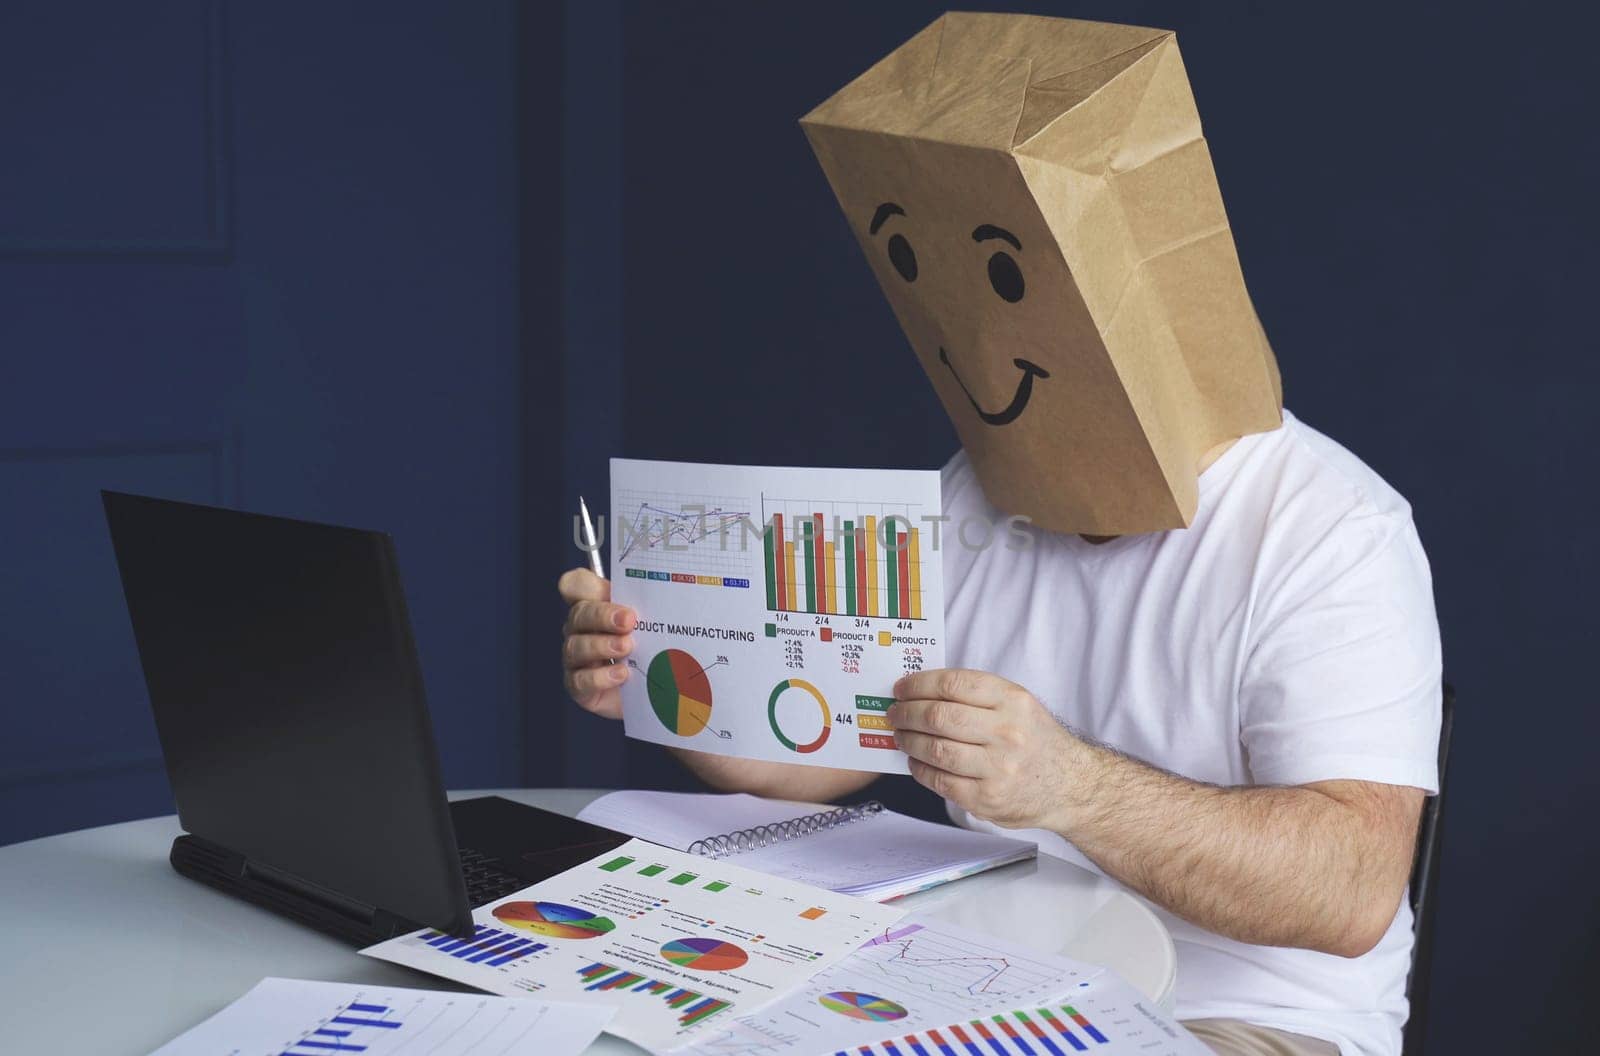 A man on whose head a bag with a drawn joyful emoticon conducts an online lesson by Sd28DimoN_1976